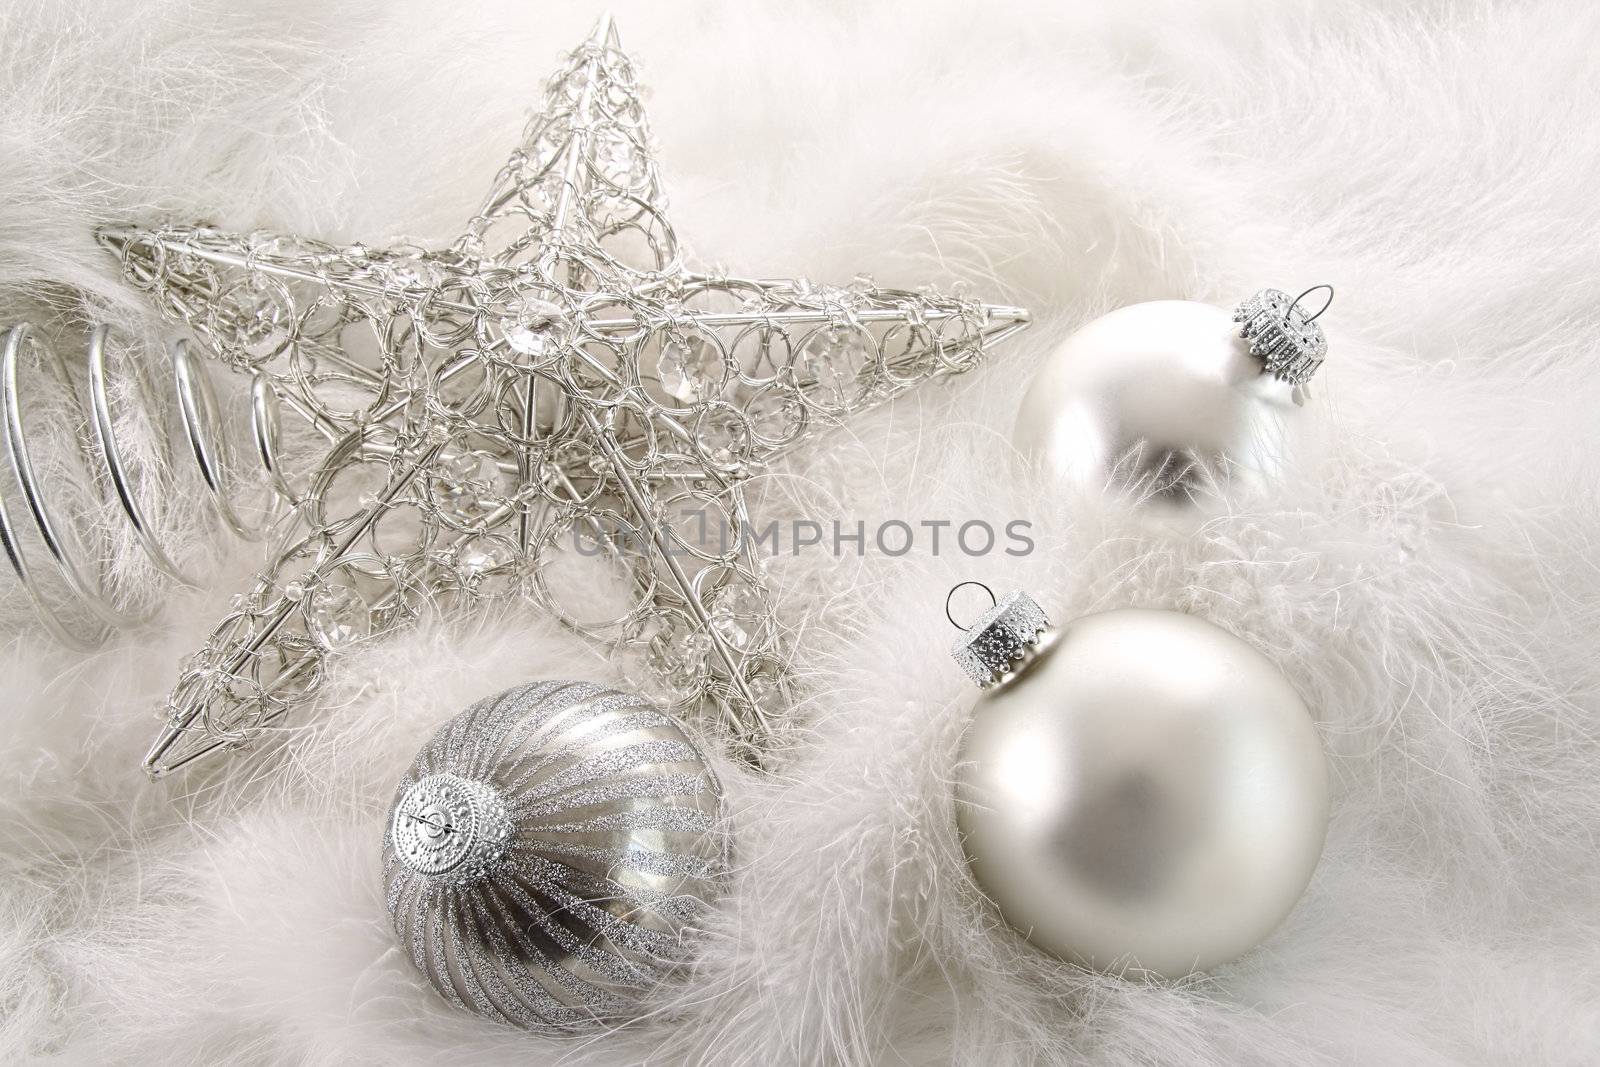 Silver holiday ornaments in feathers by Sandralise